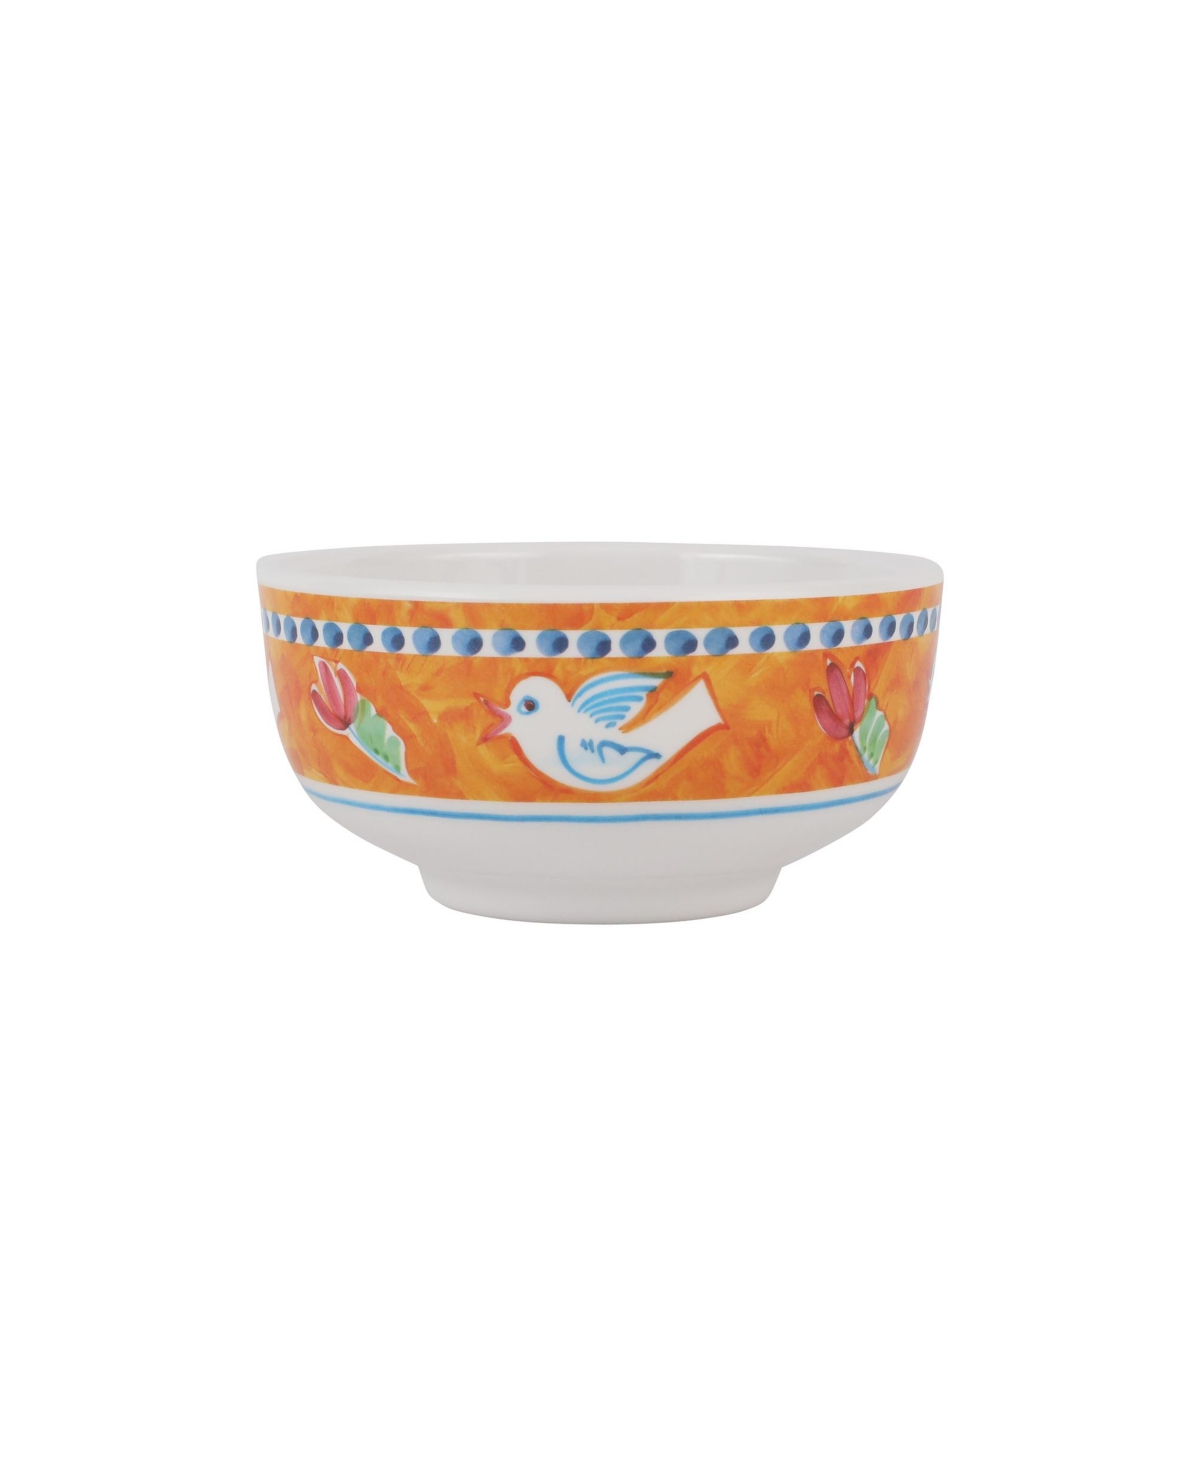 Melamine Campagna Uccello Cereal Bowl - Open Misce